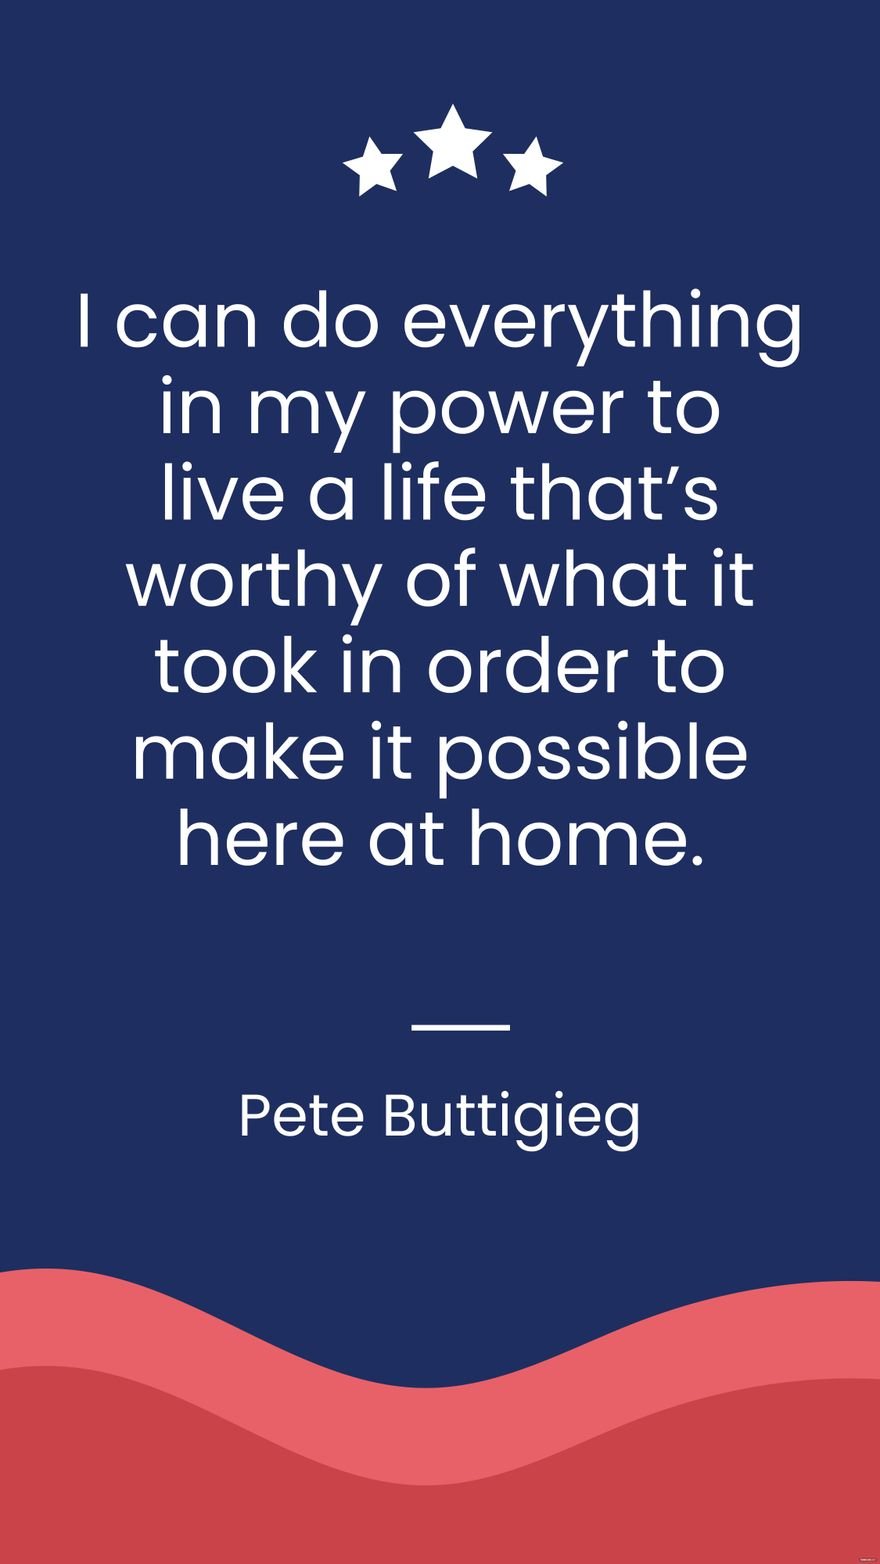 Free Pete Buttigieg - I can do everything in my power to live a life that's worthy of what it took in order to make it possible to be here at home. in JPG